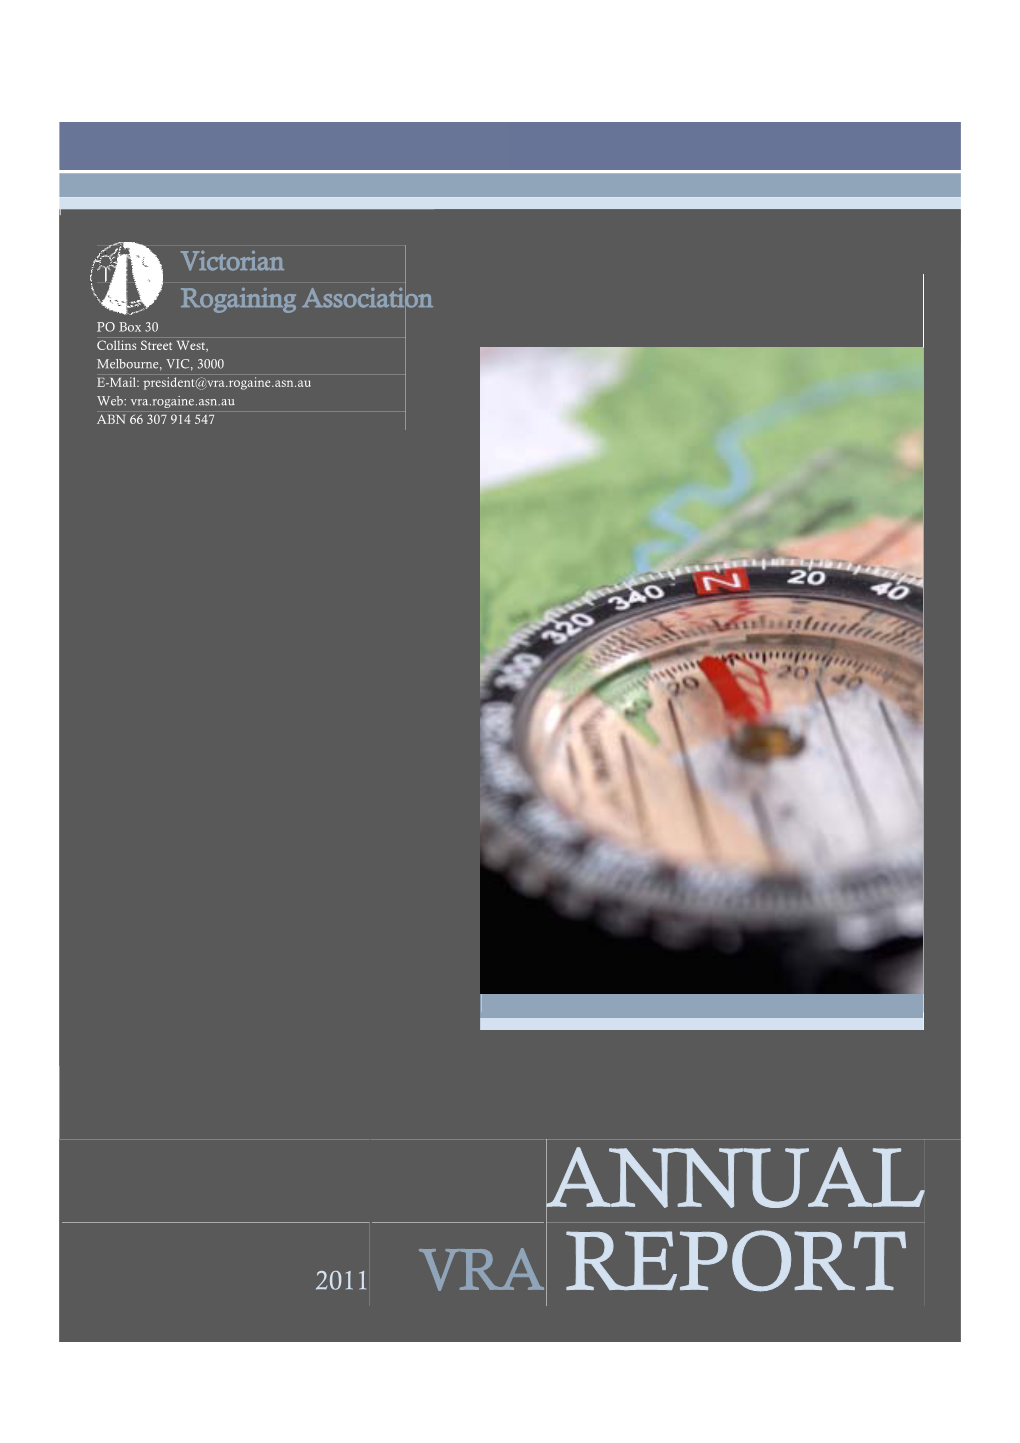 Annual Report for the 35Th Year of Operation of the Victorian Rogaining Association